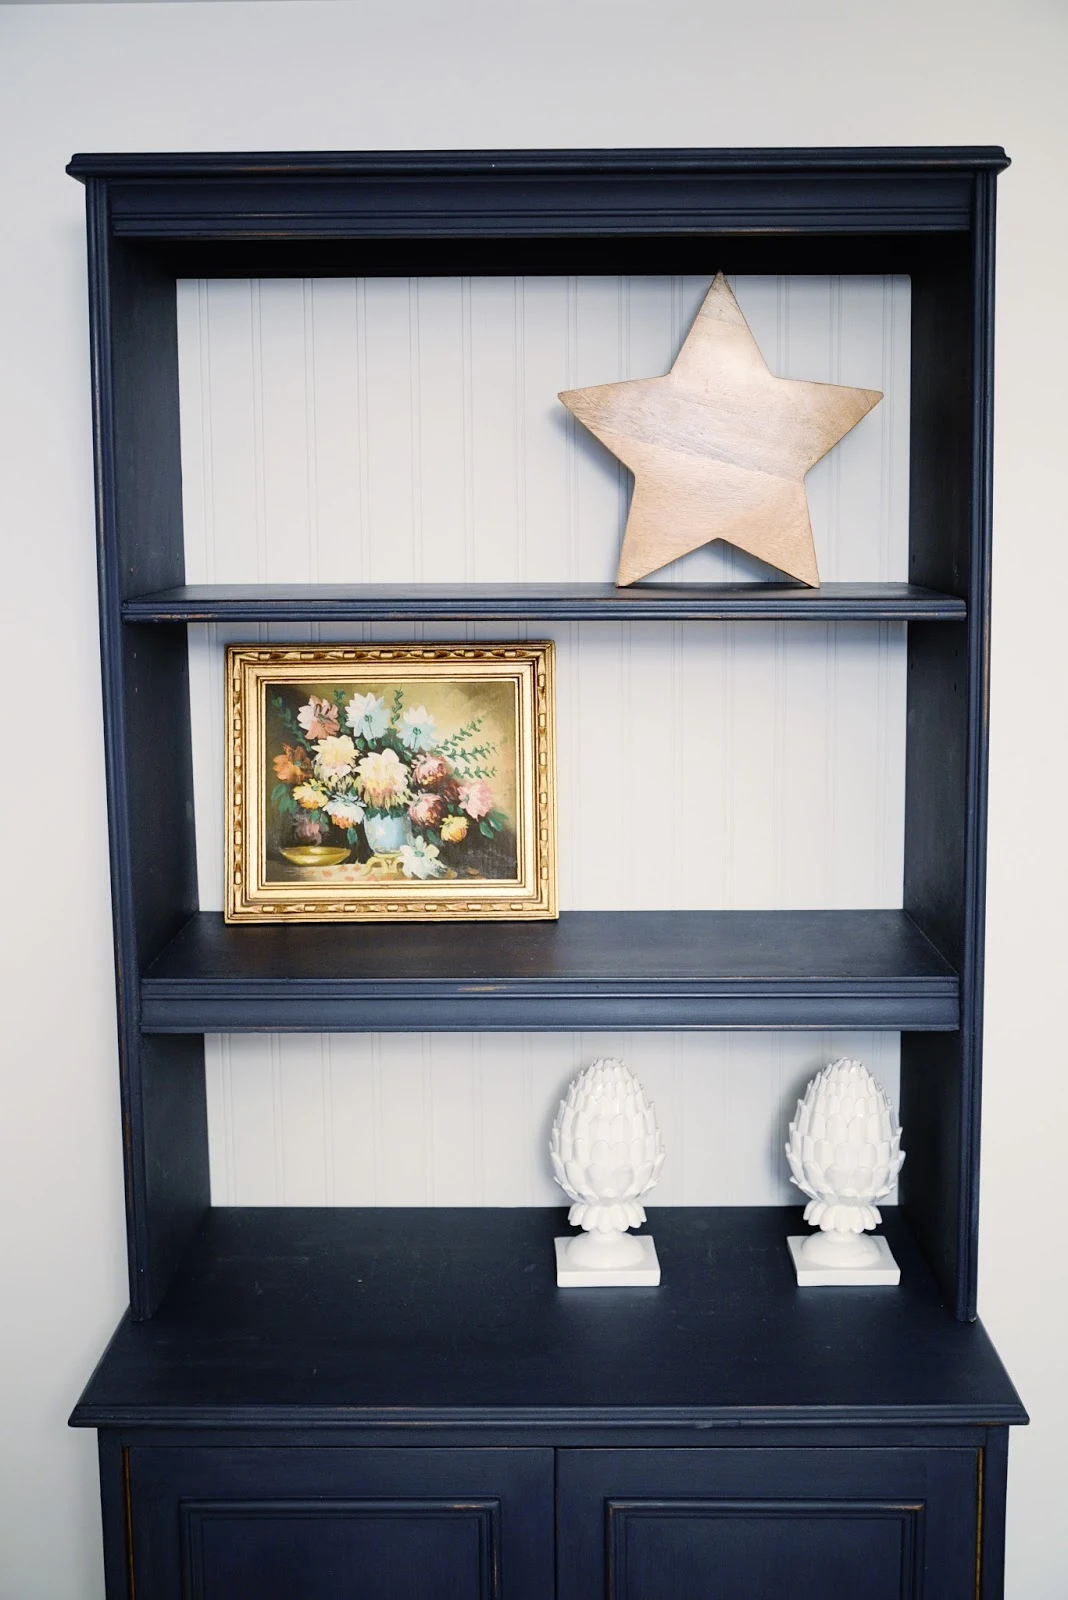 how to style a bookcase, how to decorate a bookshelf with objects other than books